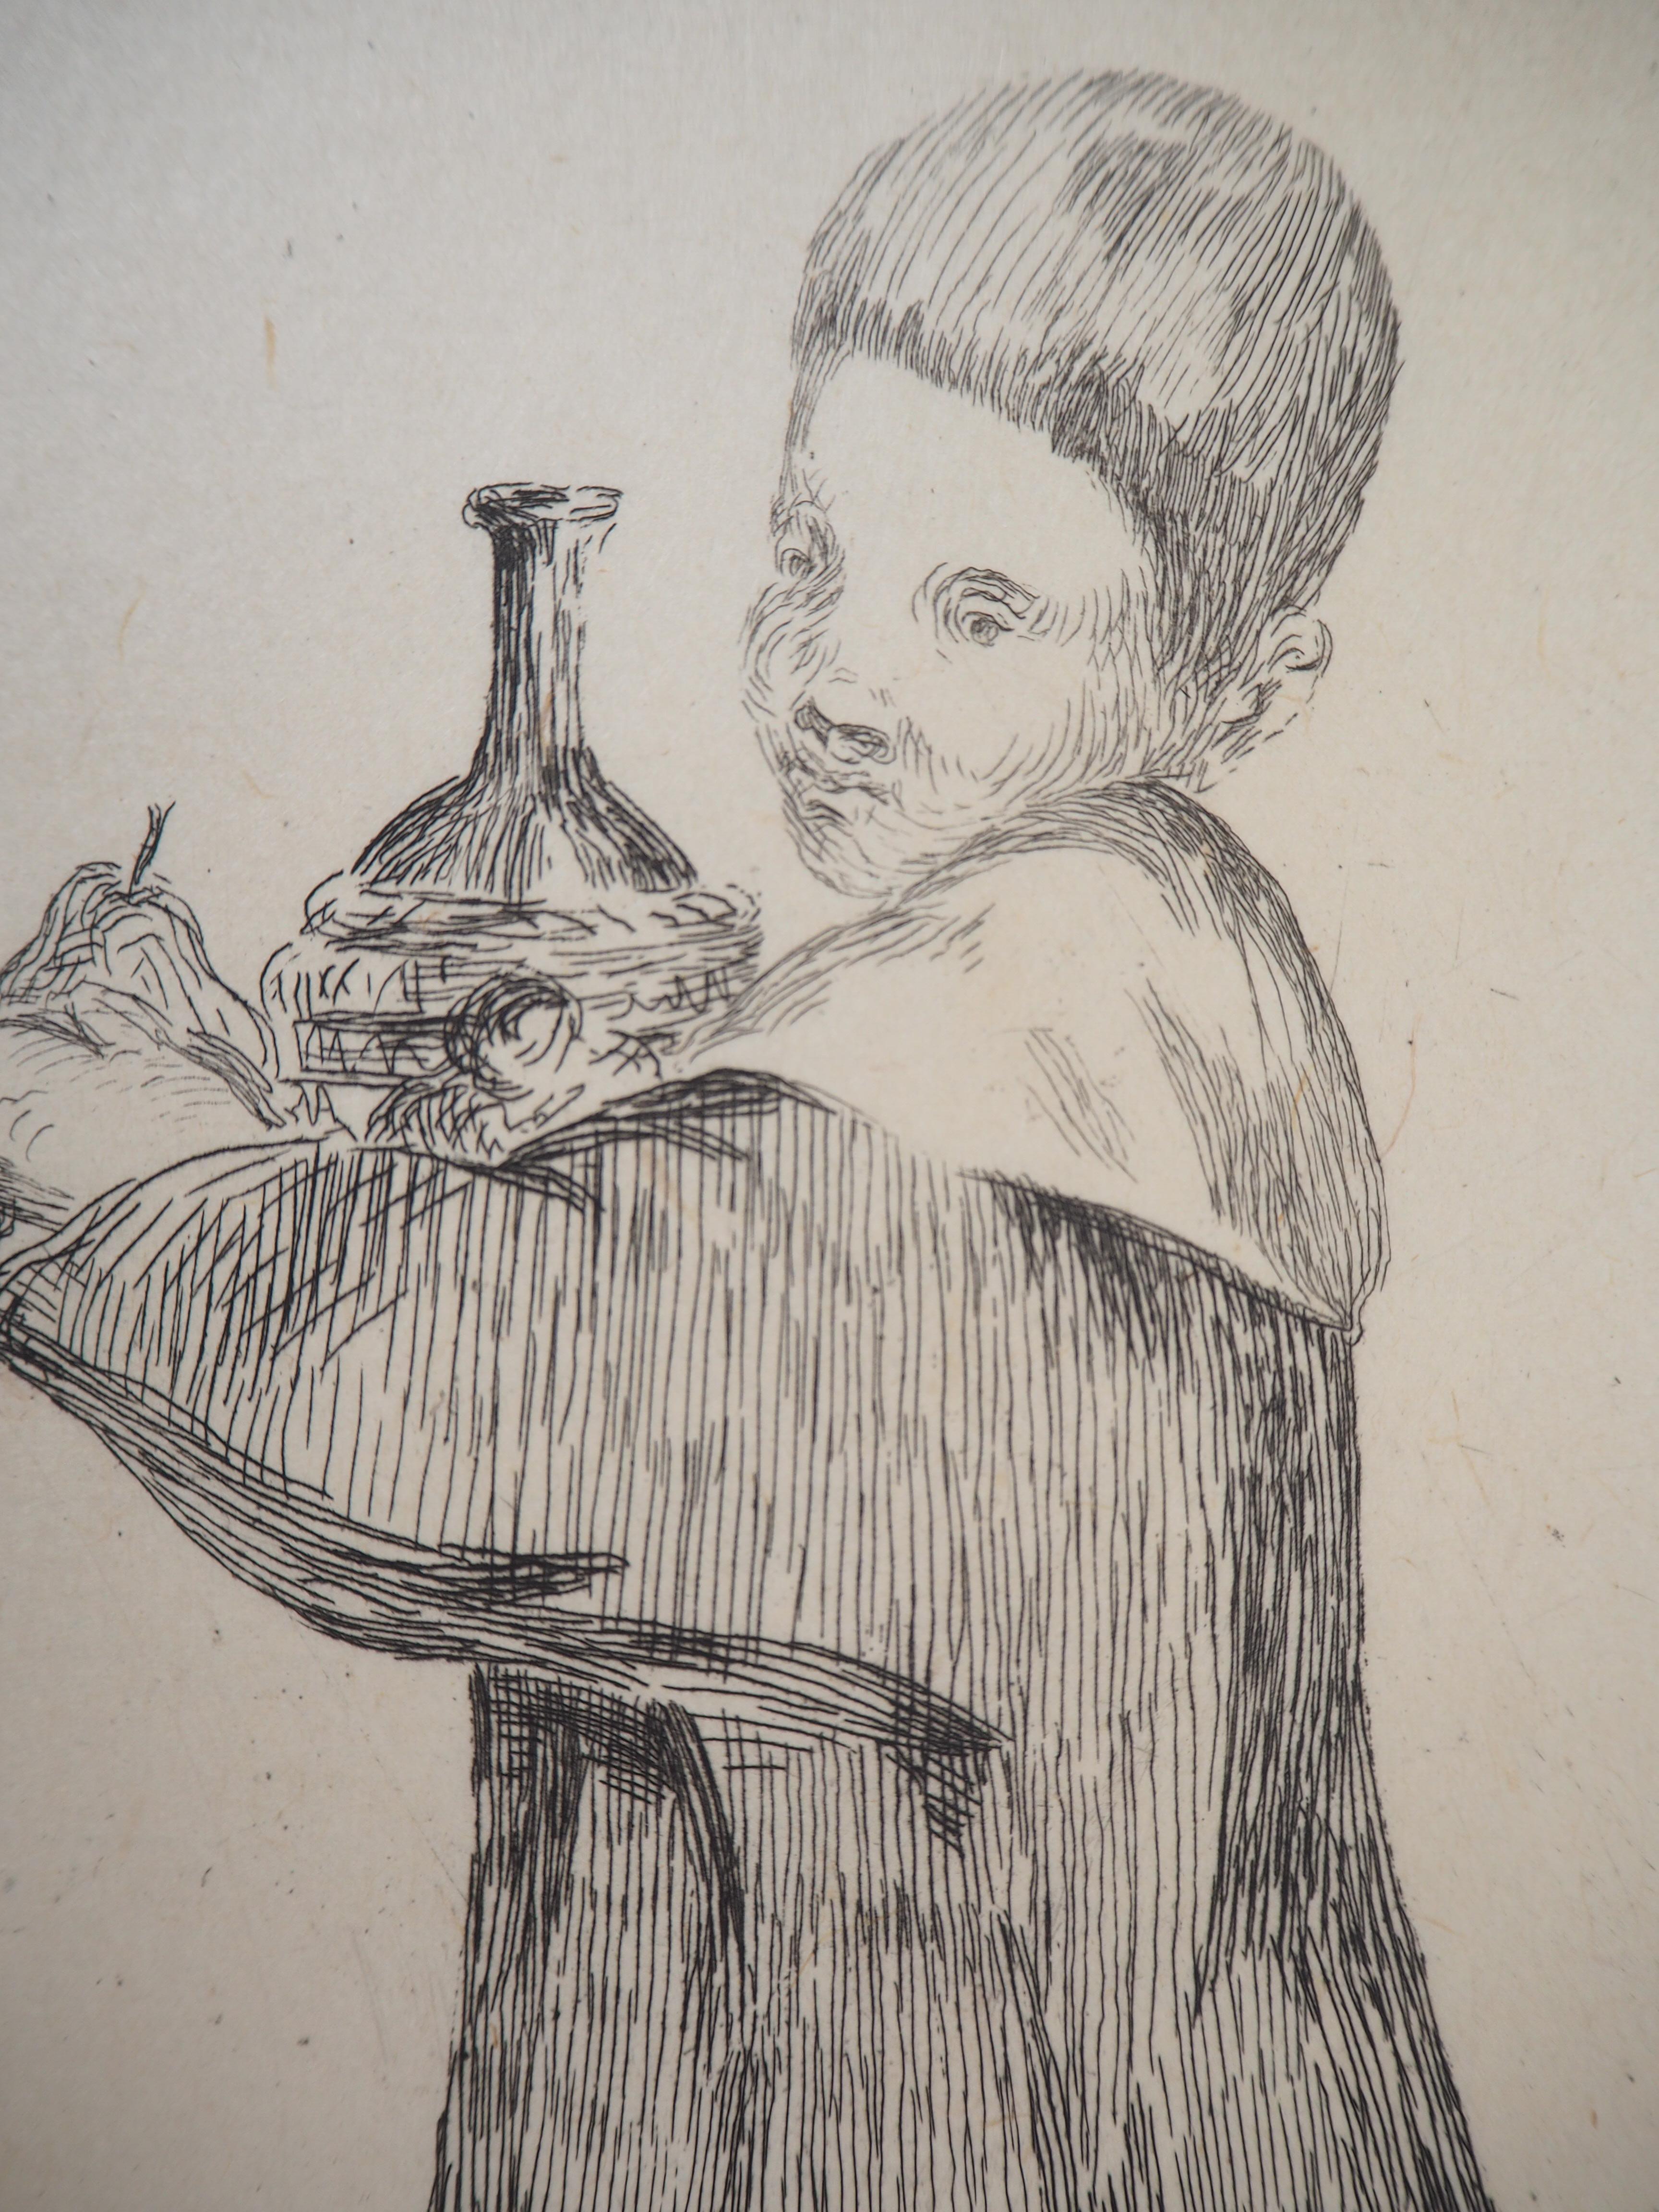 Child with a Tray (Pear and Bottle) - Original Etching (Guerin #15) - Impressionist Print by Edouard Manet